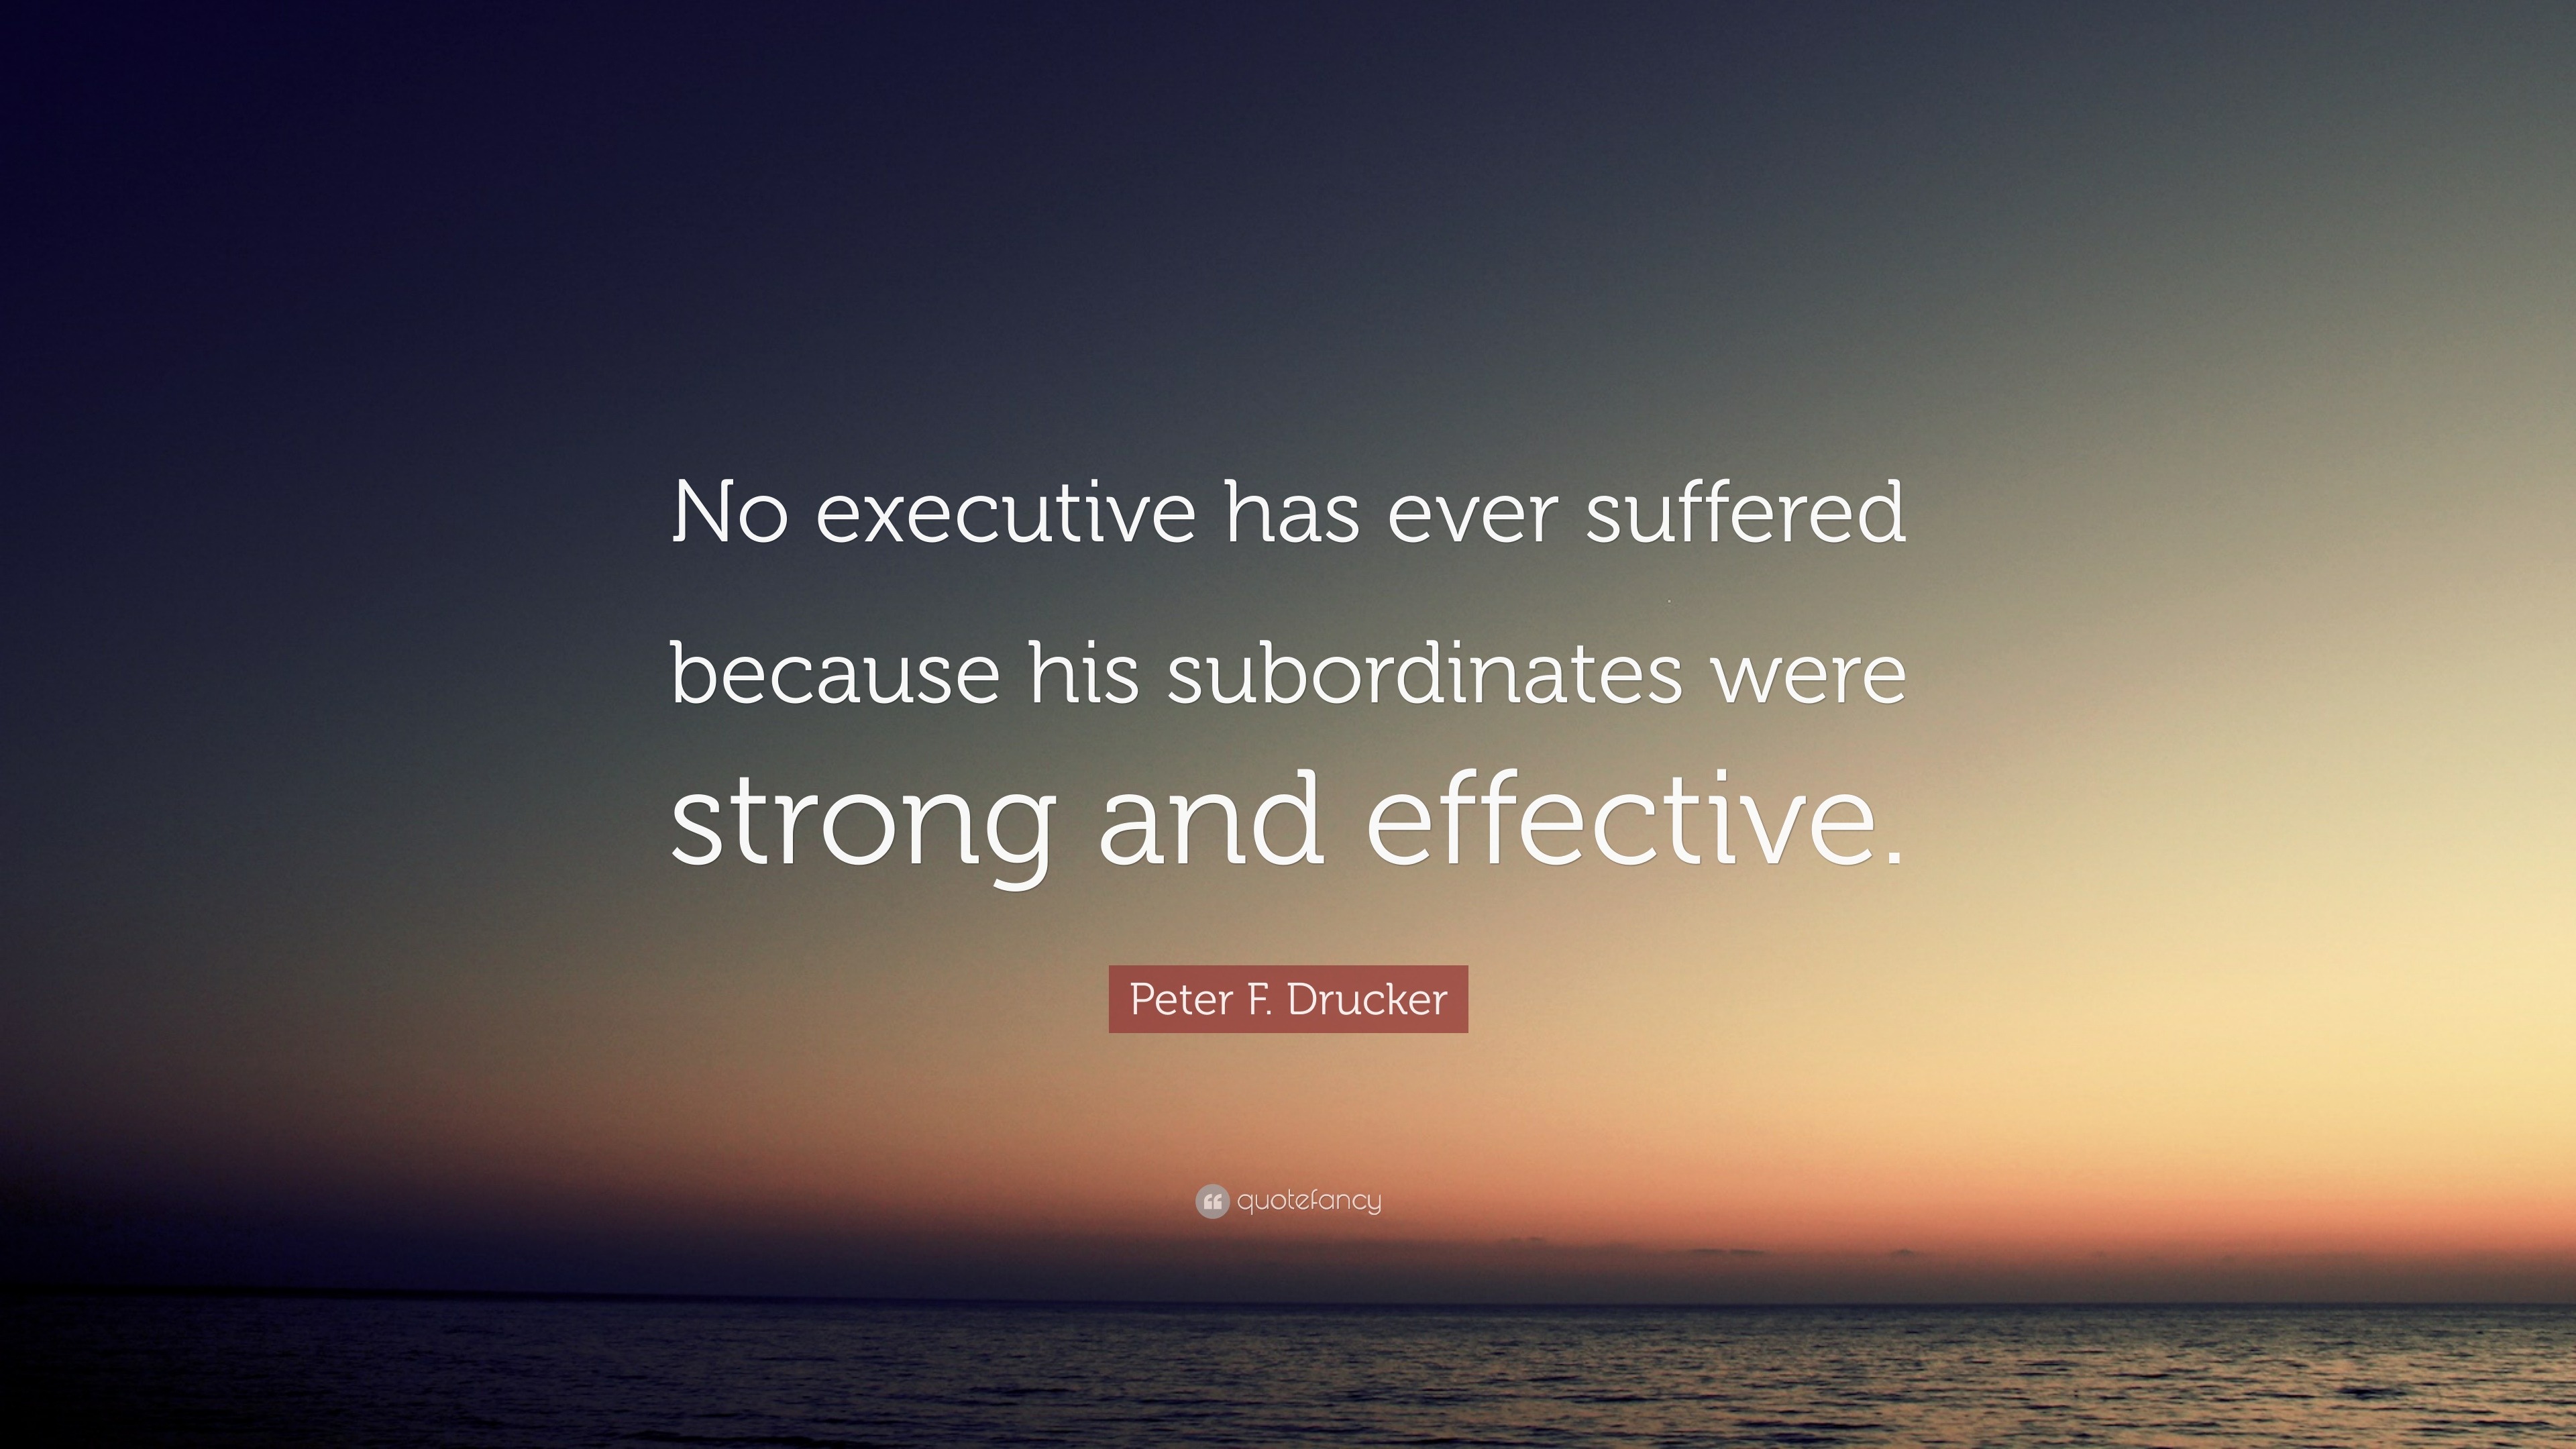 Peter F. Drucker Quote: “No executive has ever suffered because his